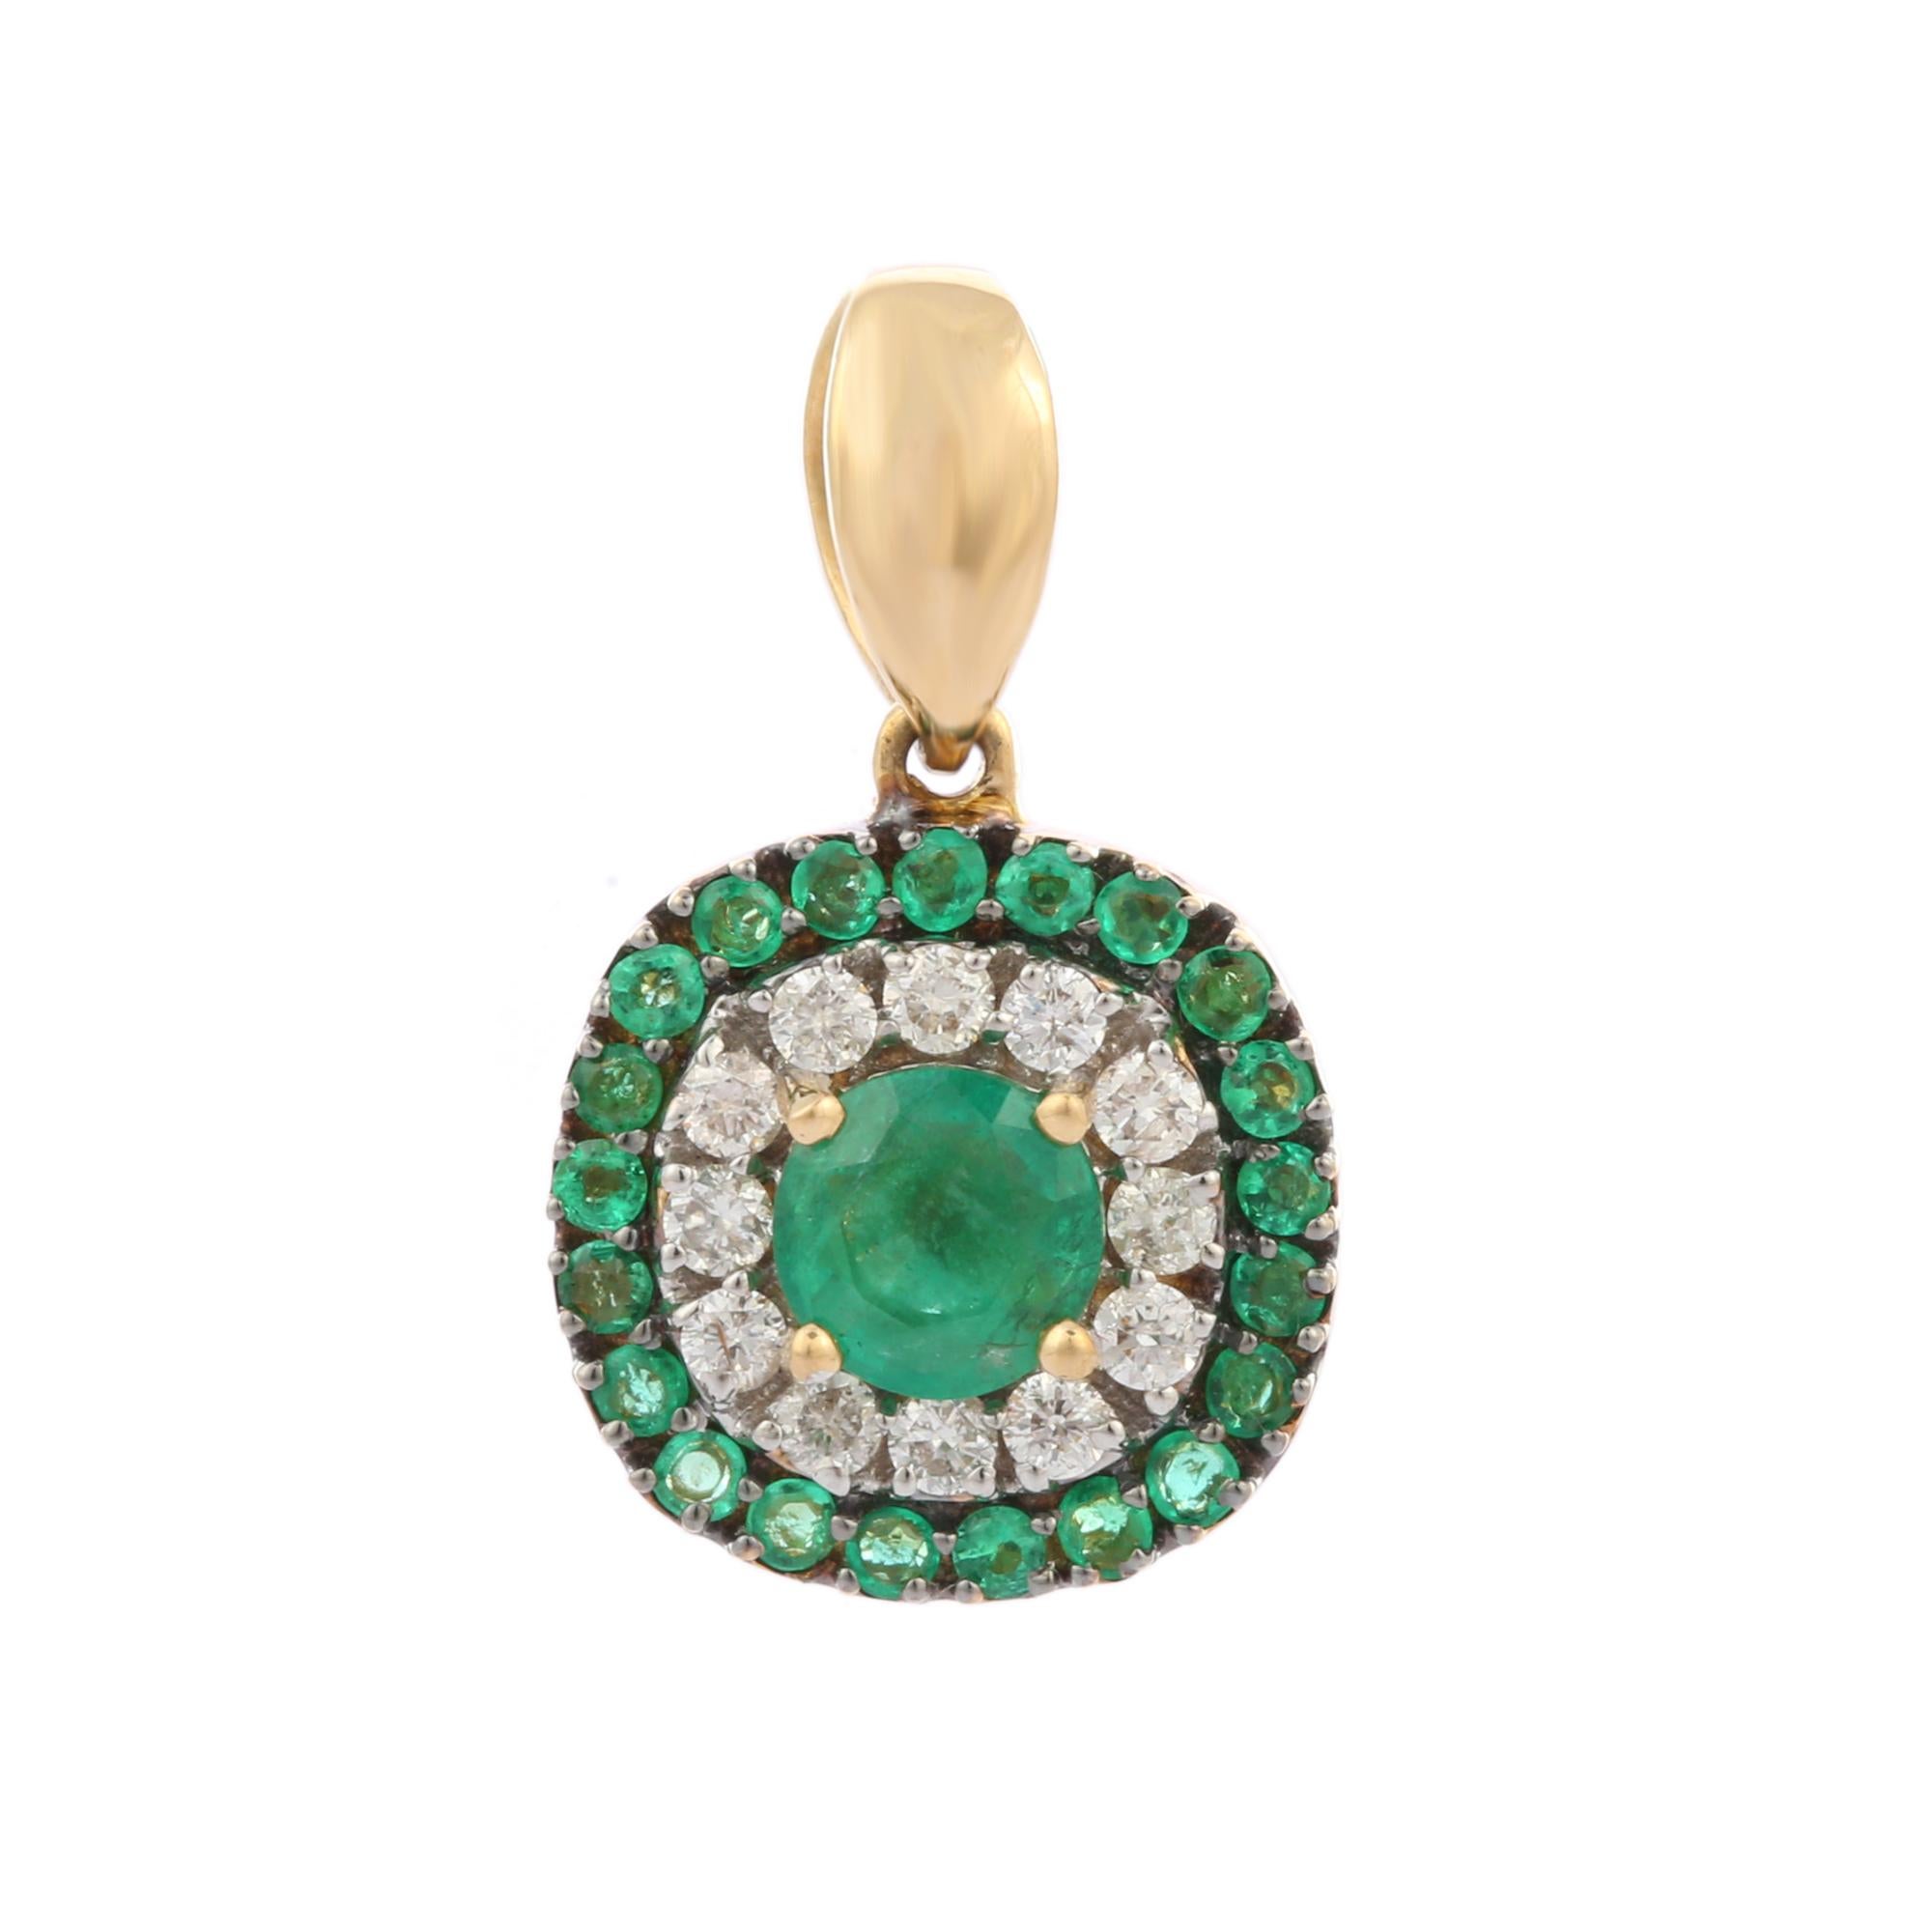 Anglo-Indian Art Deco Style Emerald Pendant in 14K Yellow Gold with Diamonds For Sale